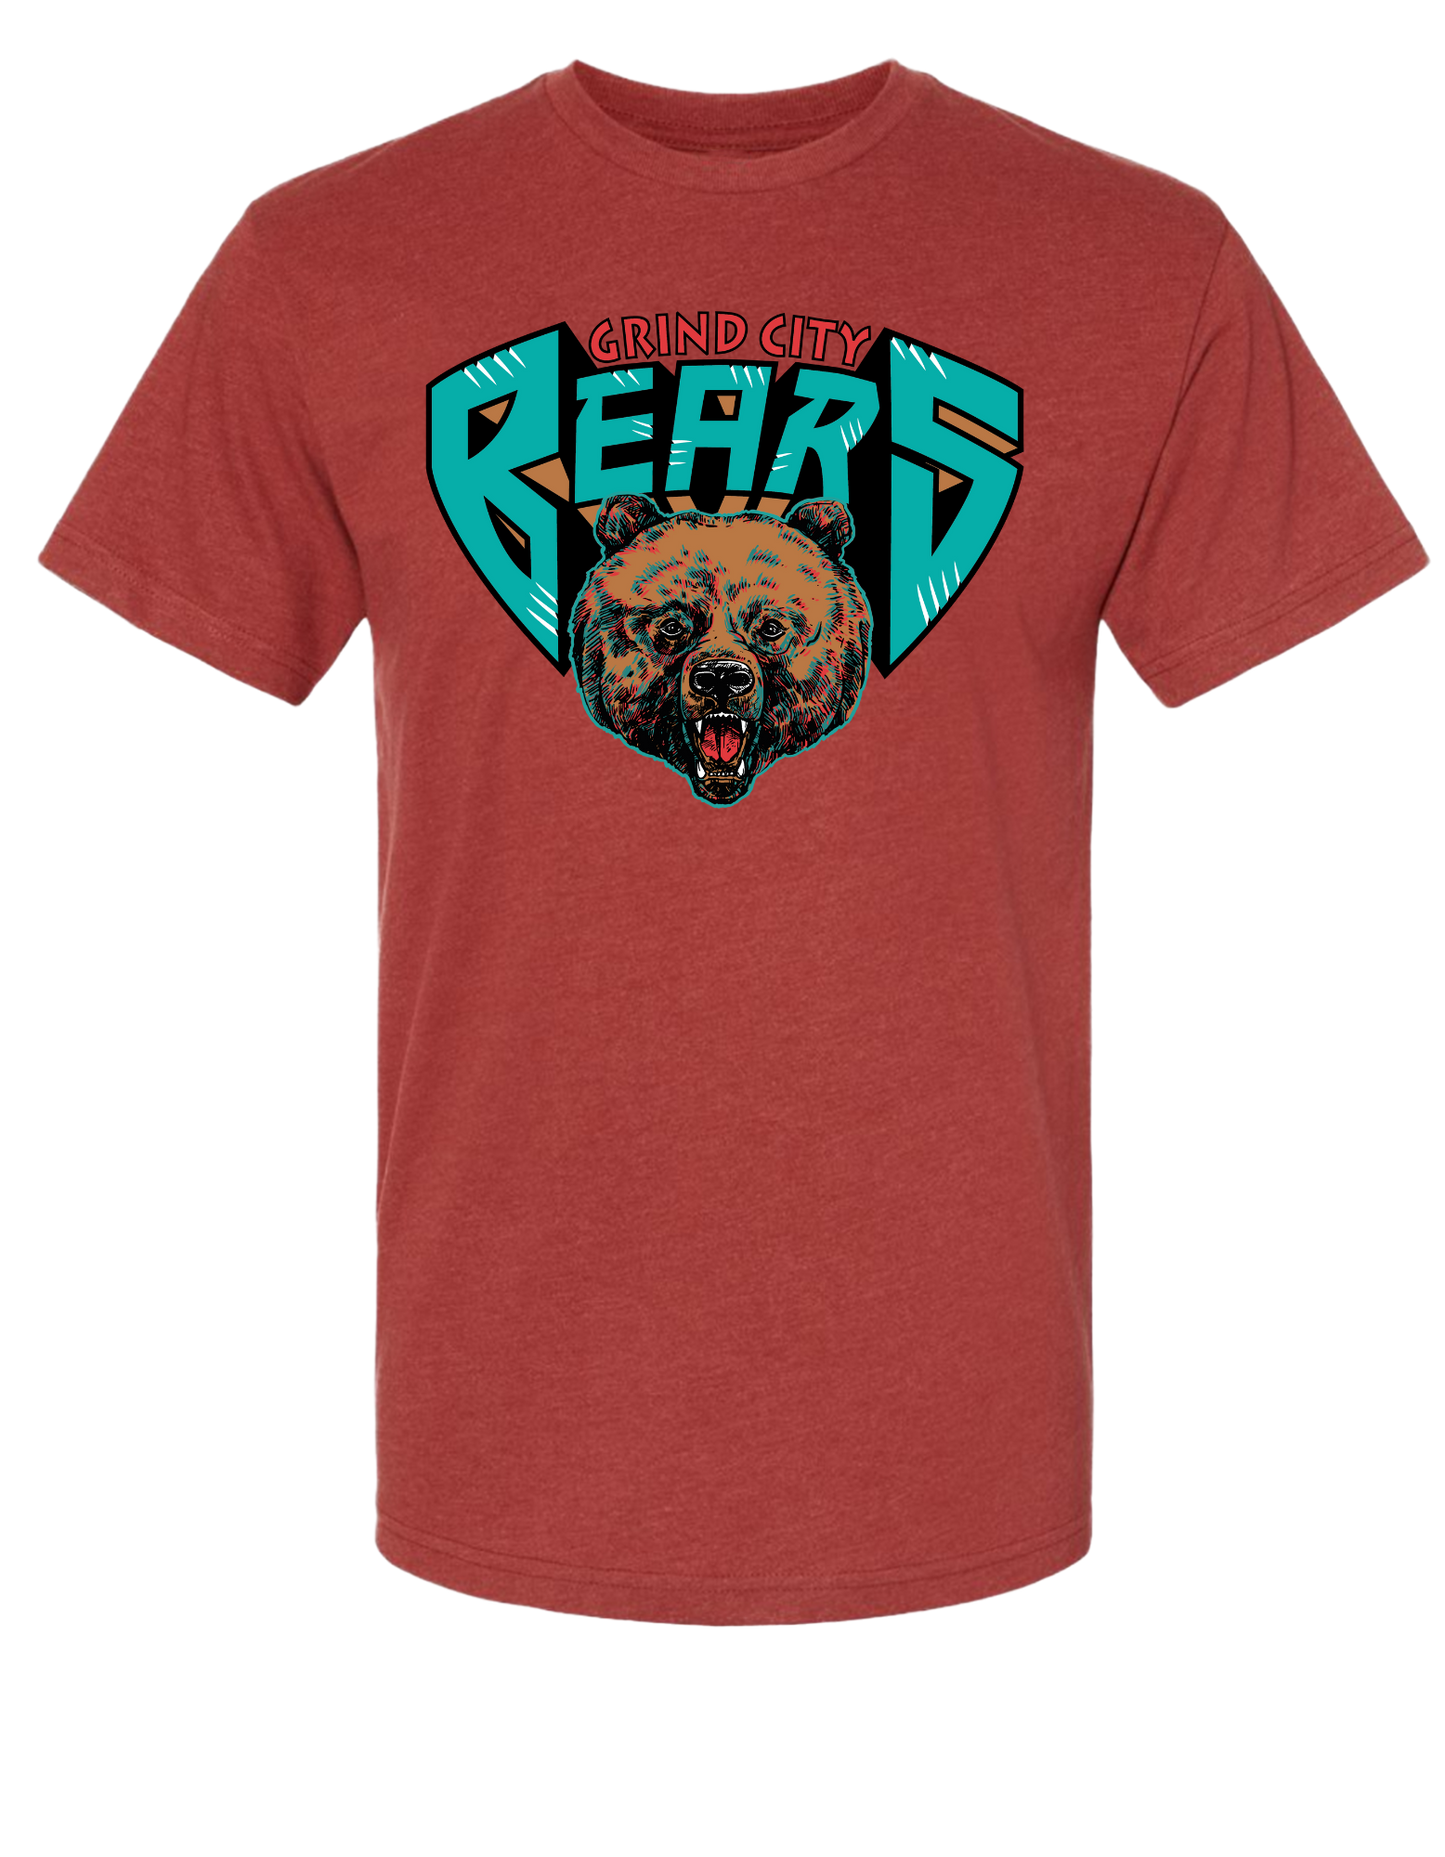 The Grind City Bears T-Shirt - Heather Teja, Heather Pacific and Natural